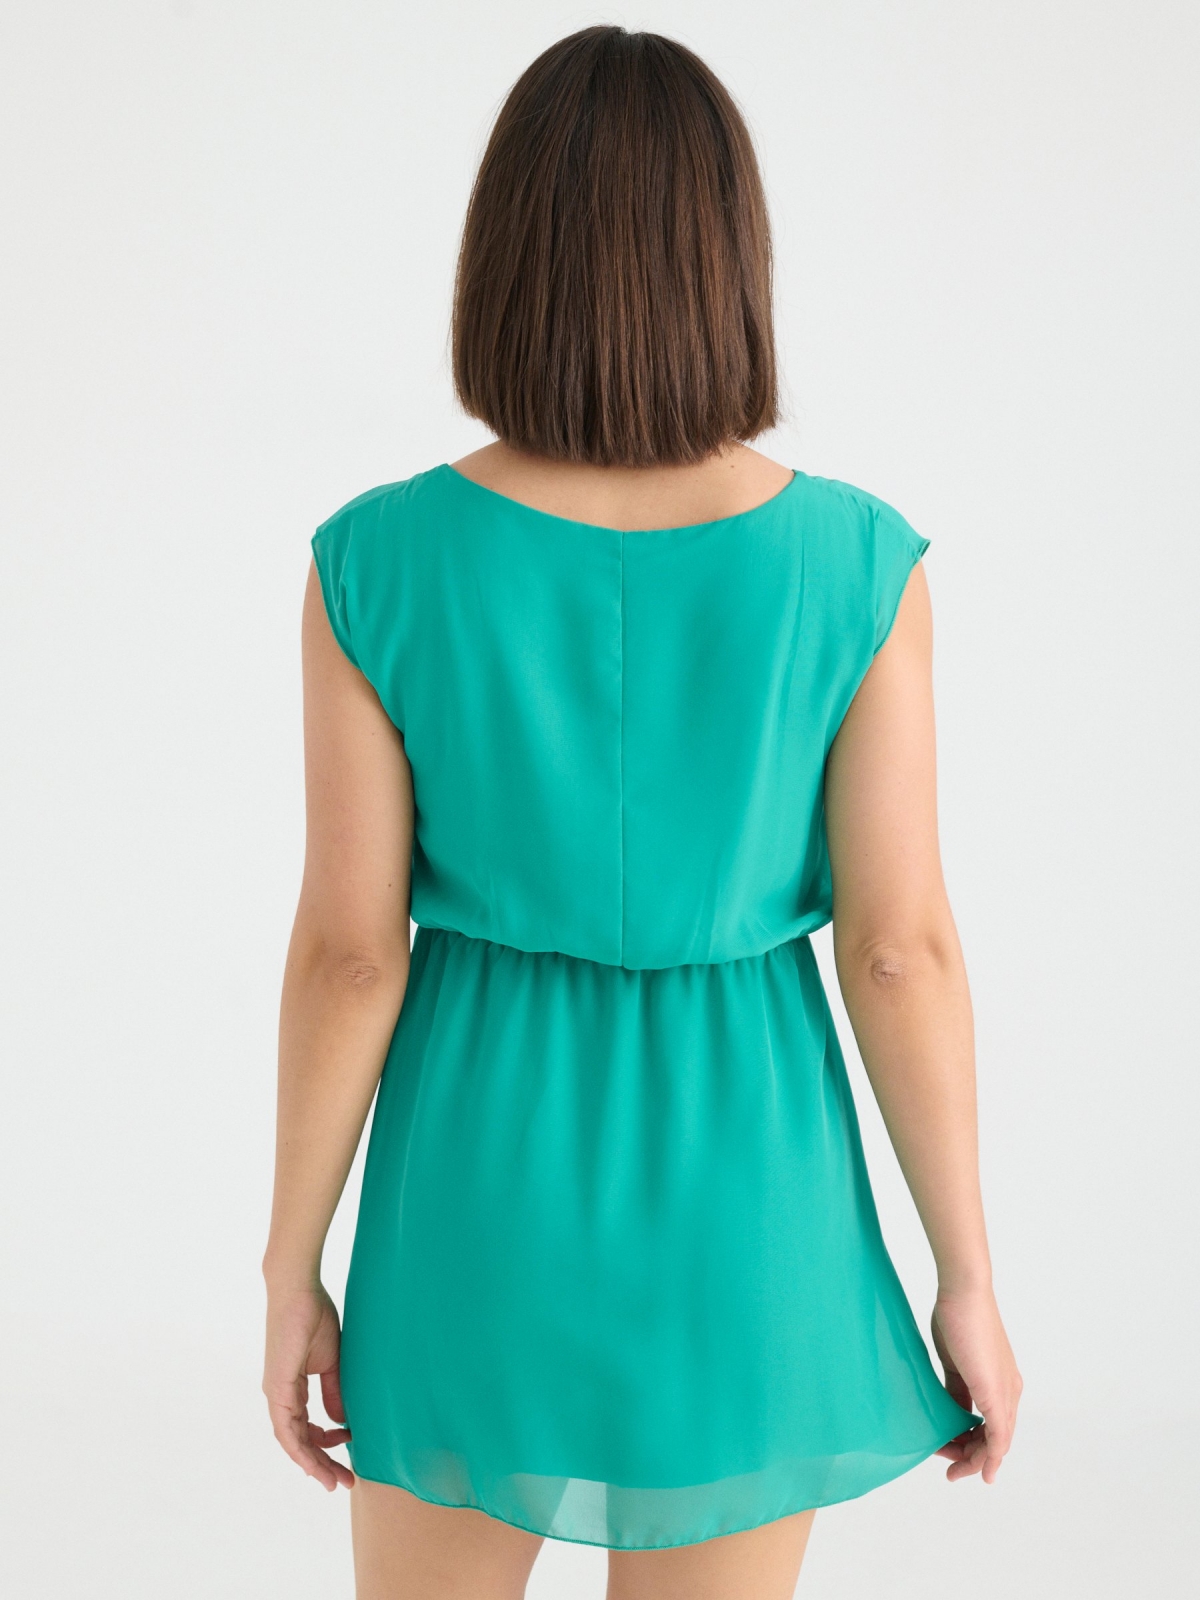 Elastic waist dress green middle back view